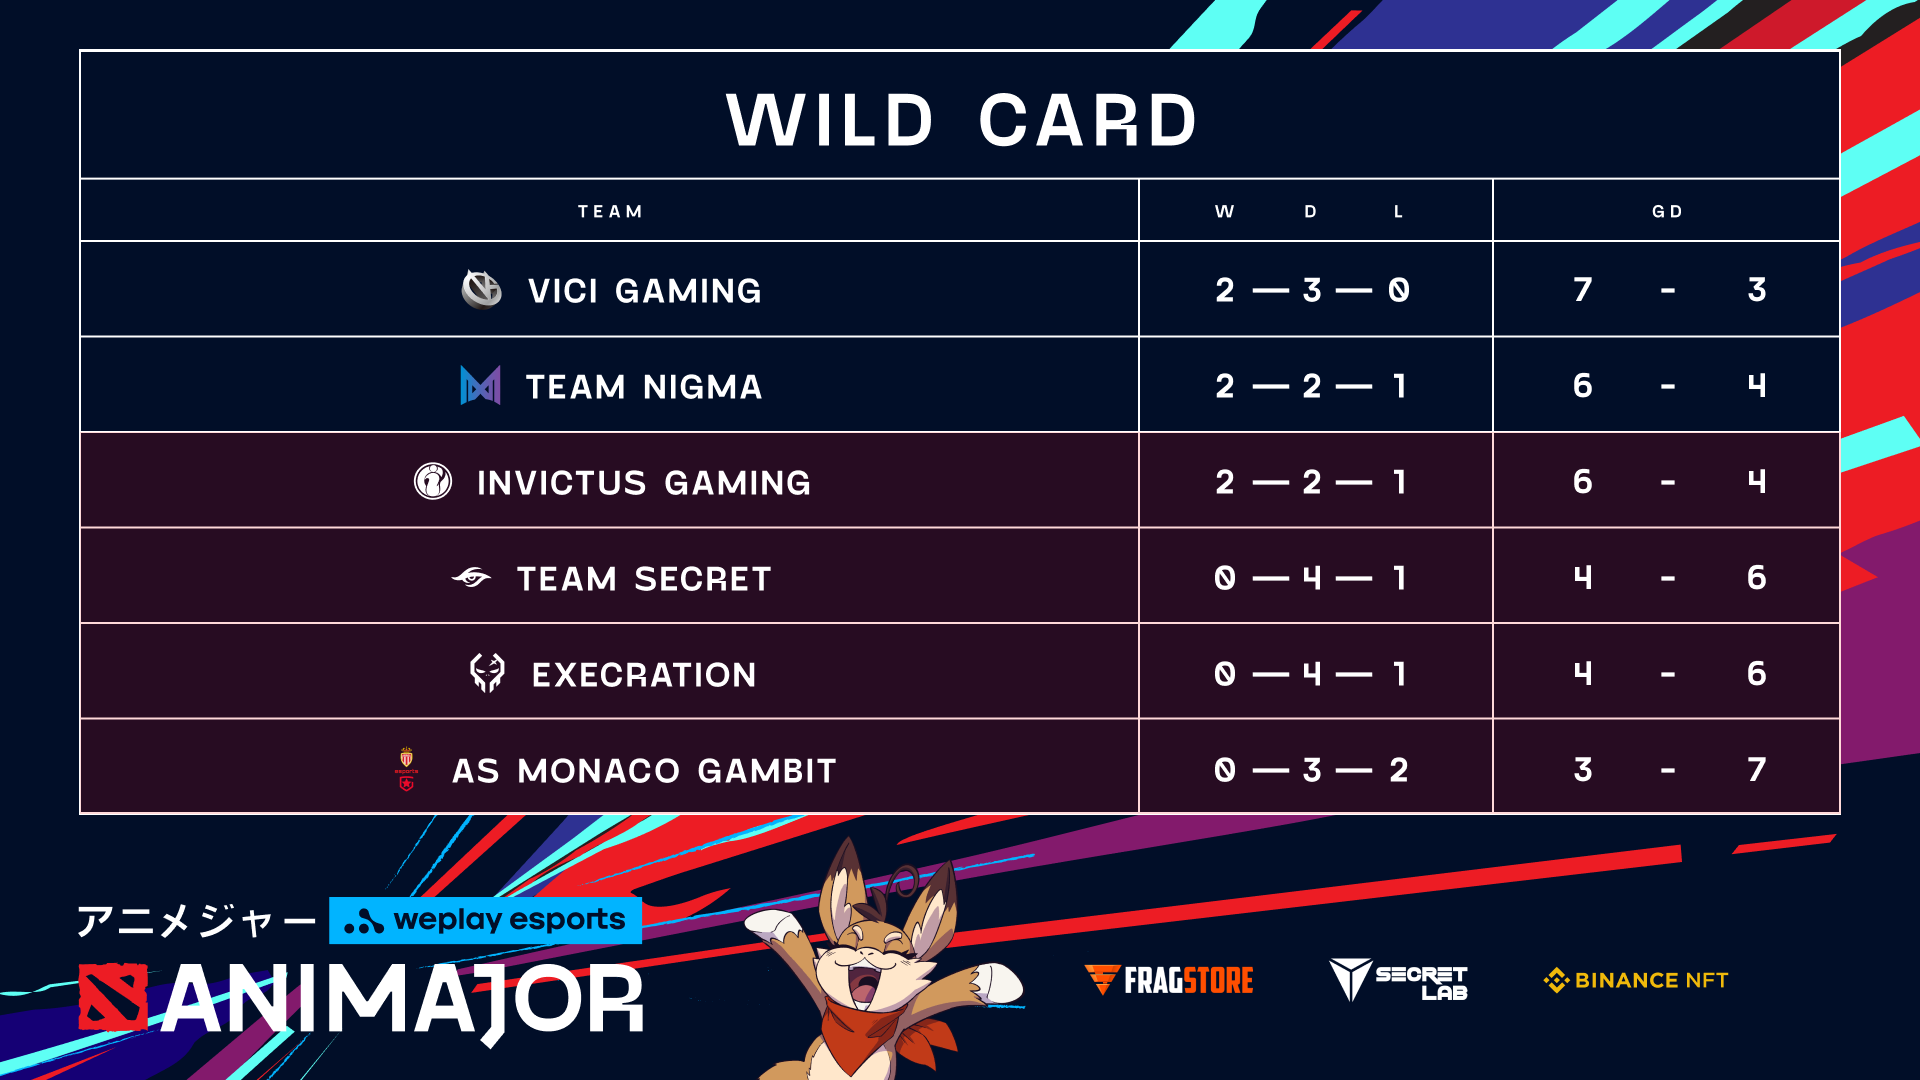 Final results of the WePlay AniMajor Wild Card. Image: WePlay Holding